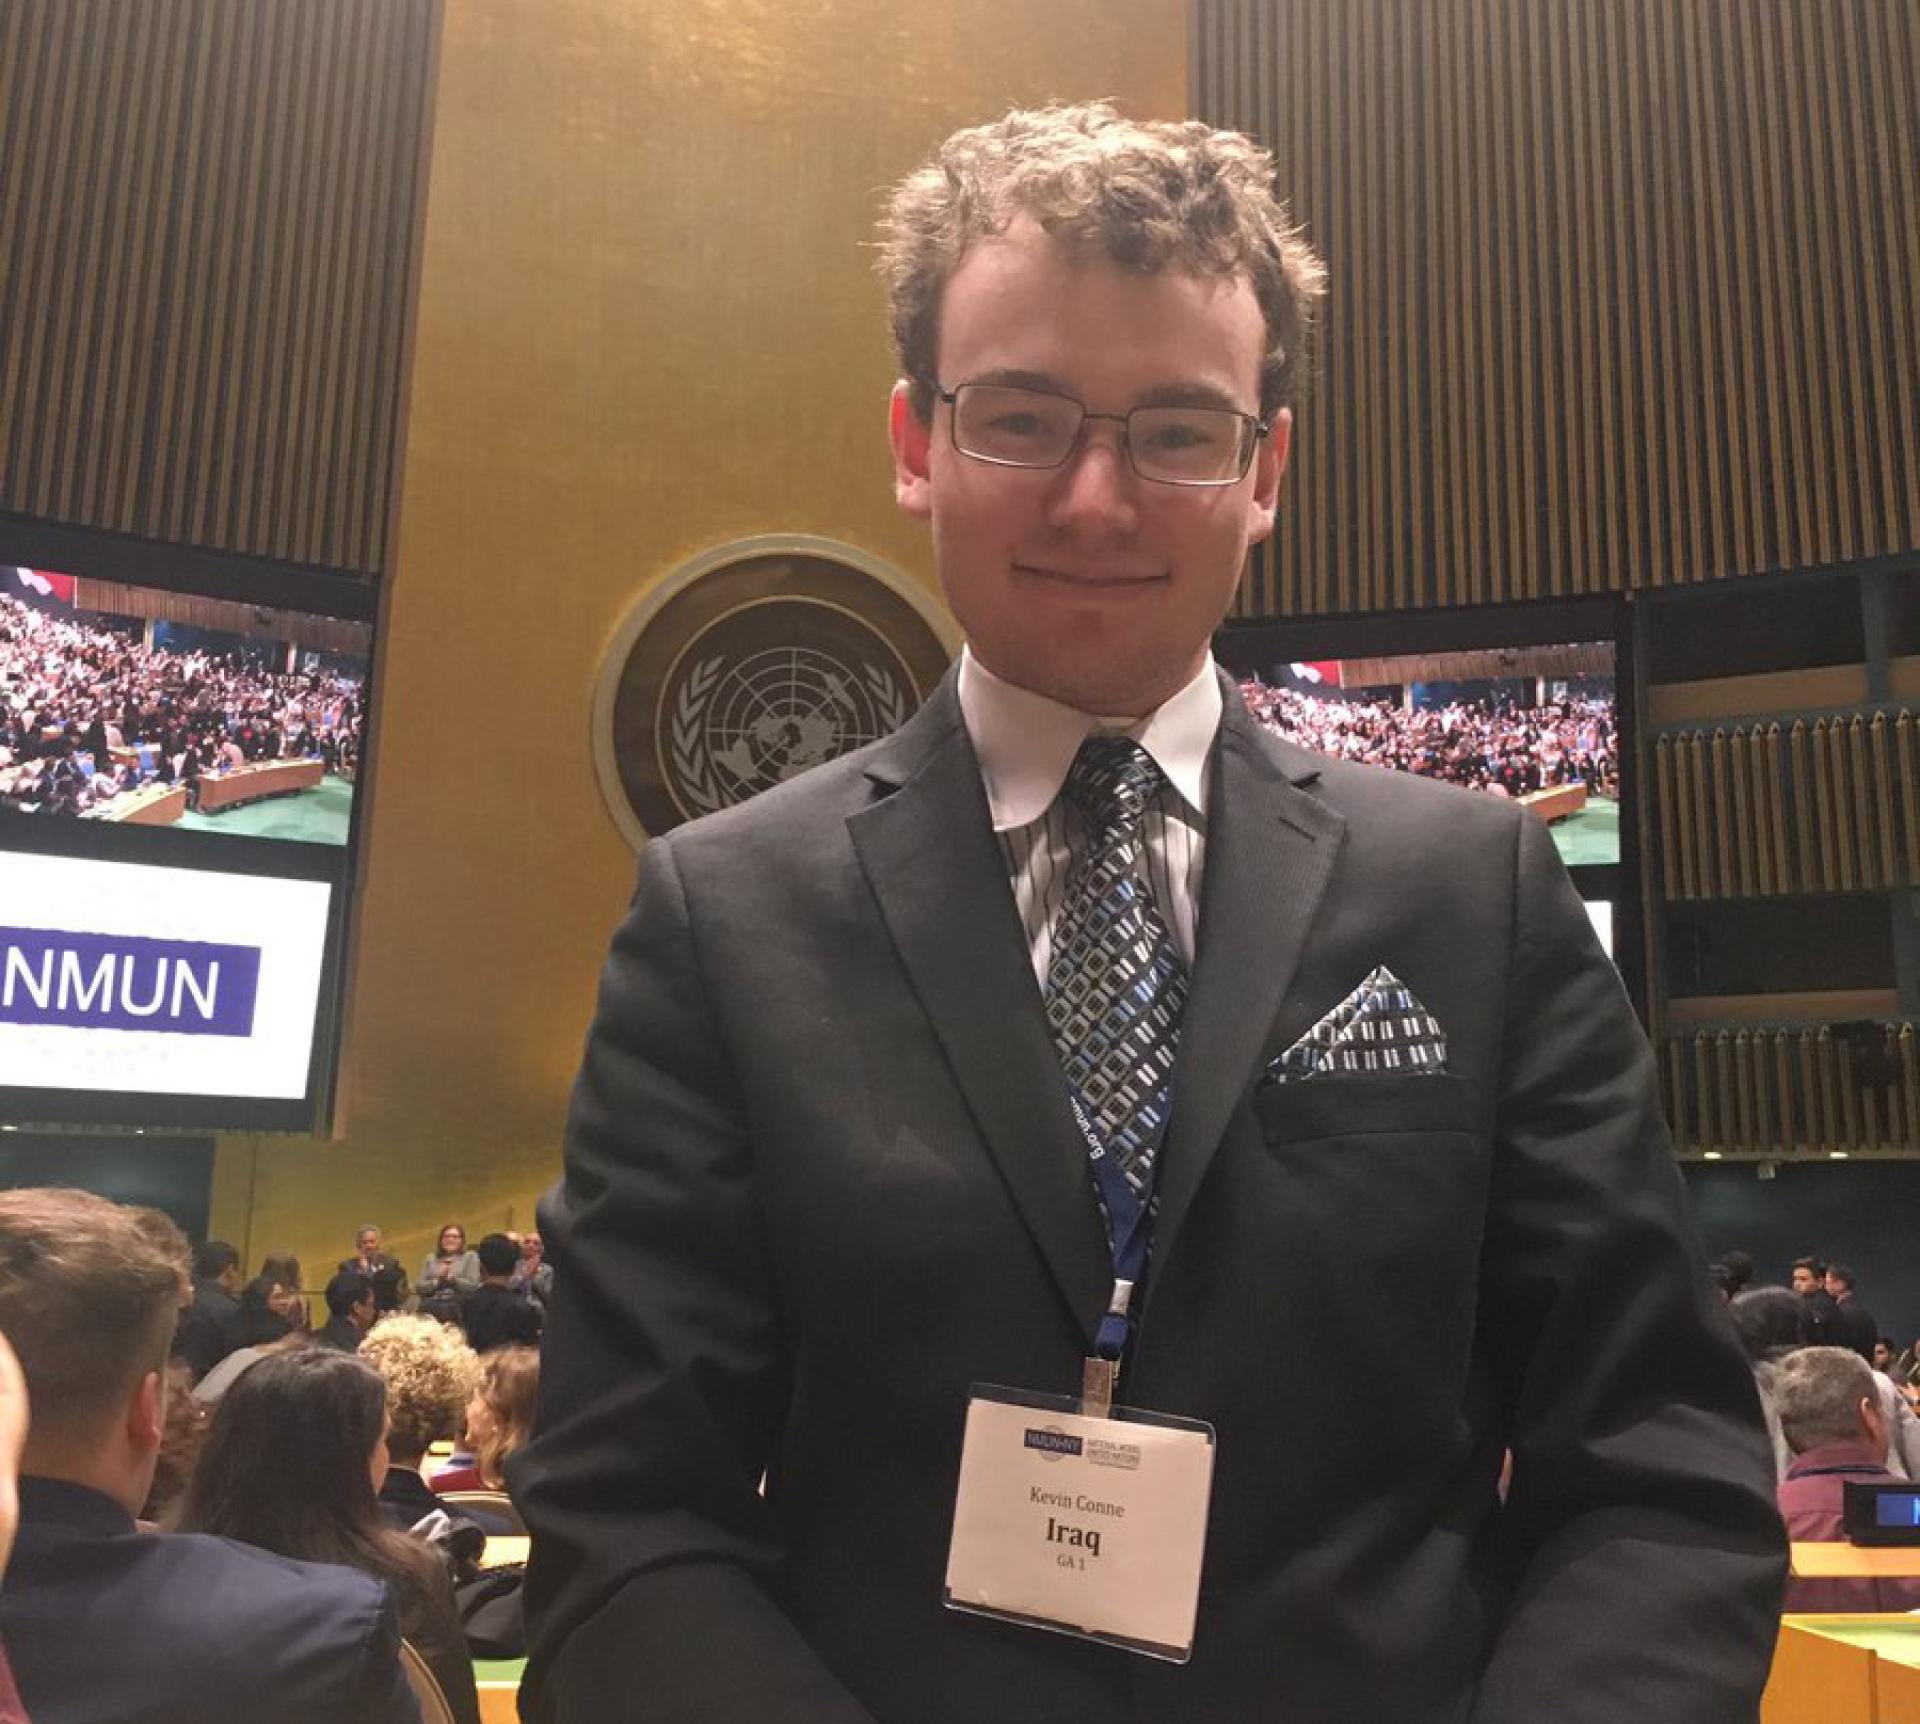 North Central College student Kevin Conne at the national model United Nations conference.